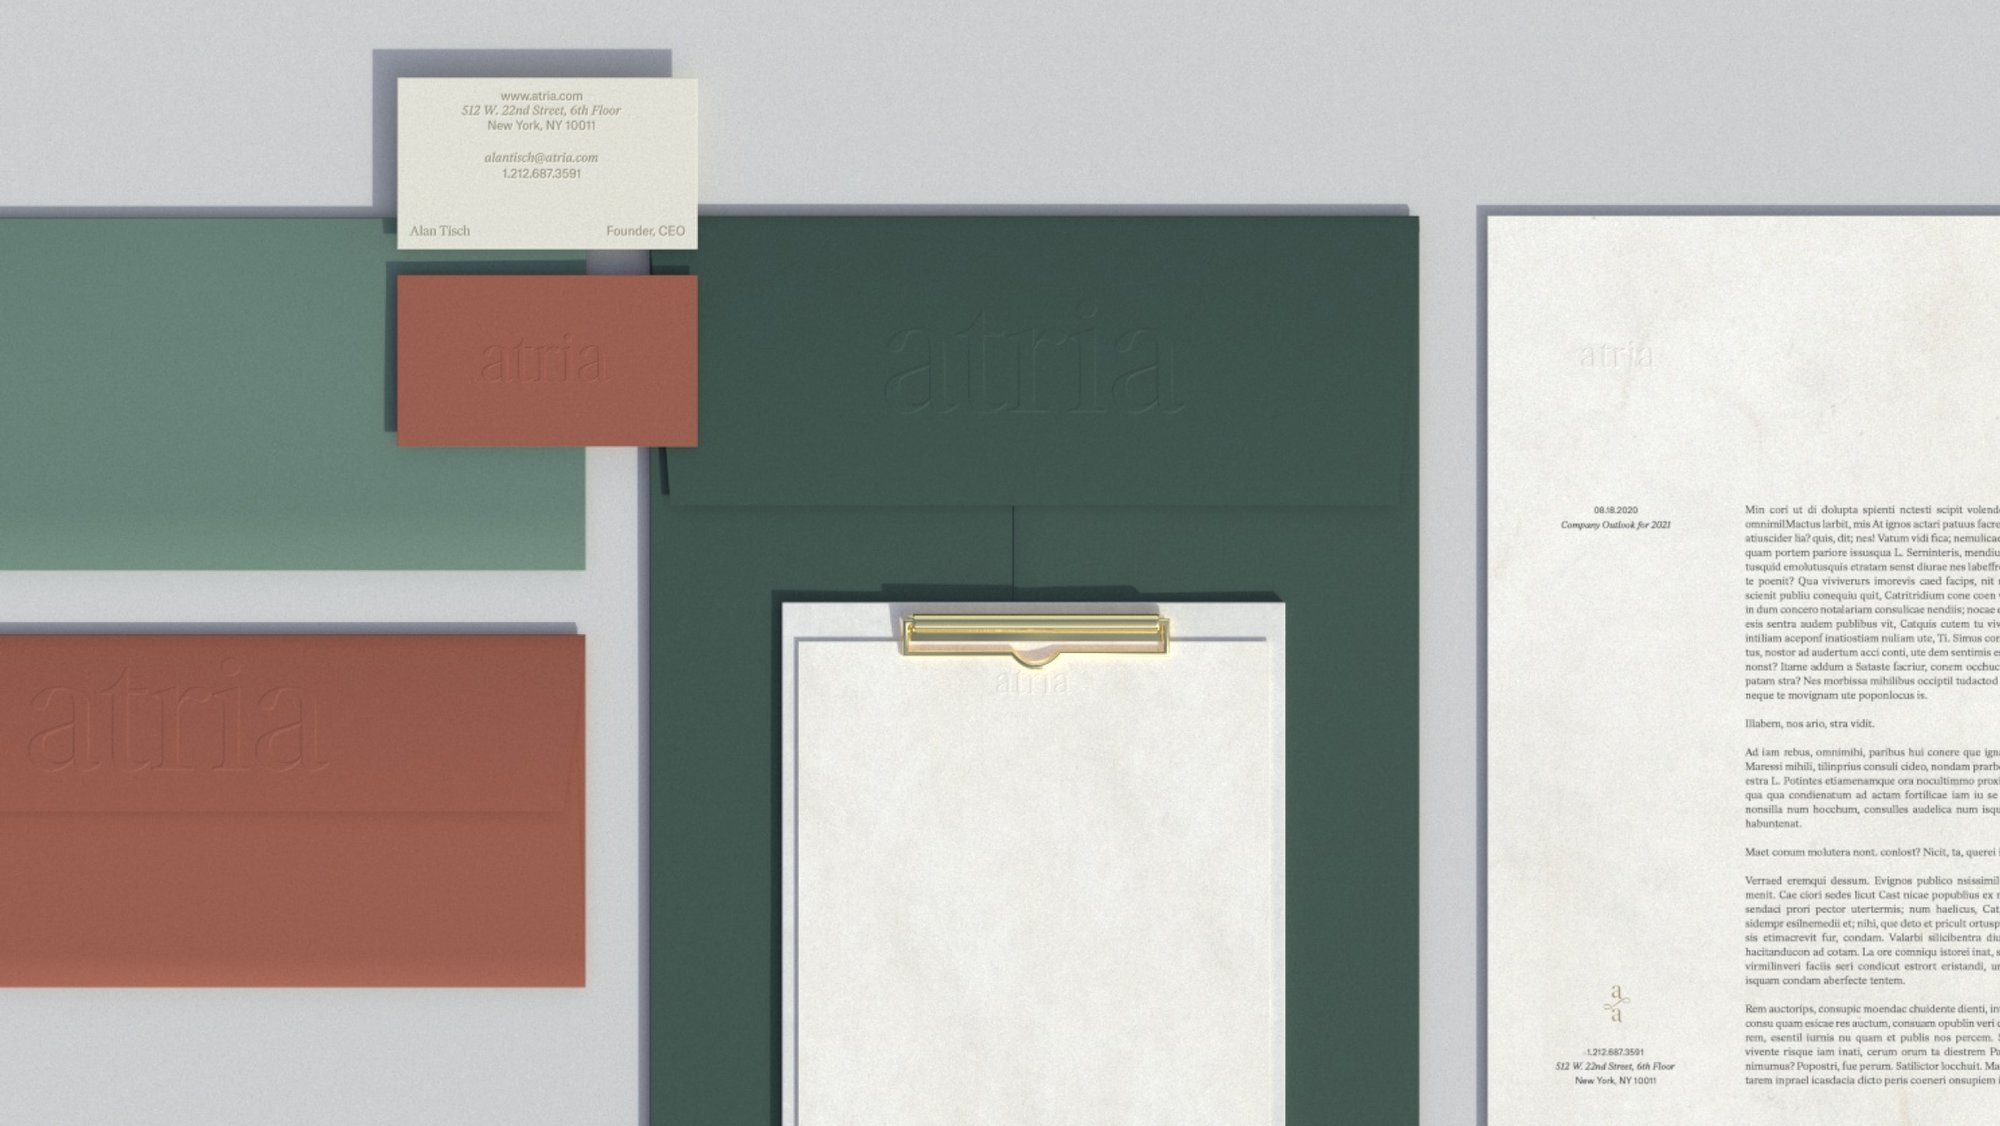 Branded Atria stationary, business cards, envelopes, and notebooks with an embossed Atria logo in white, green, and red